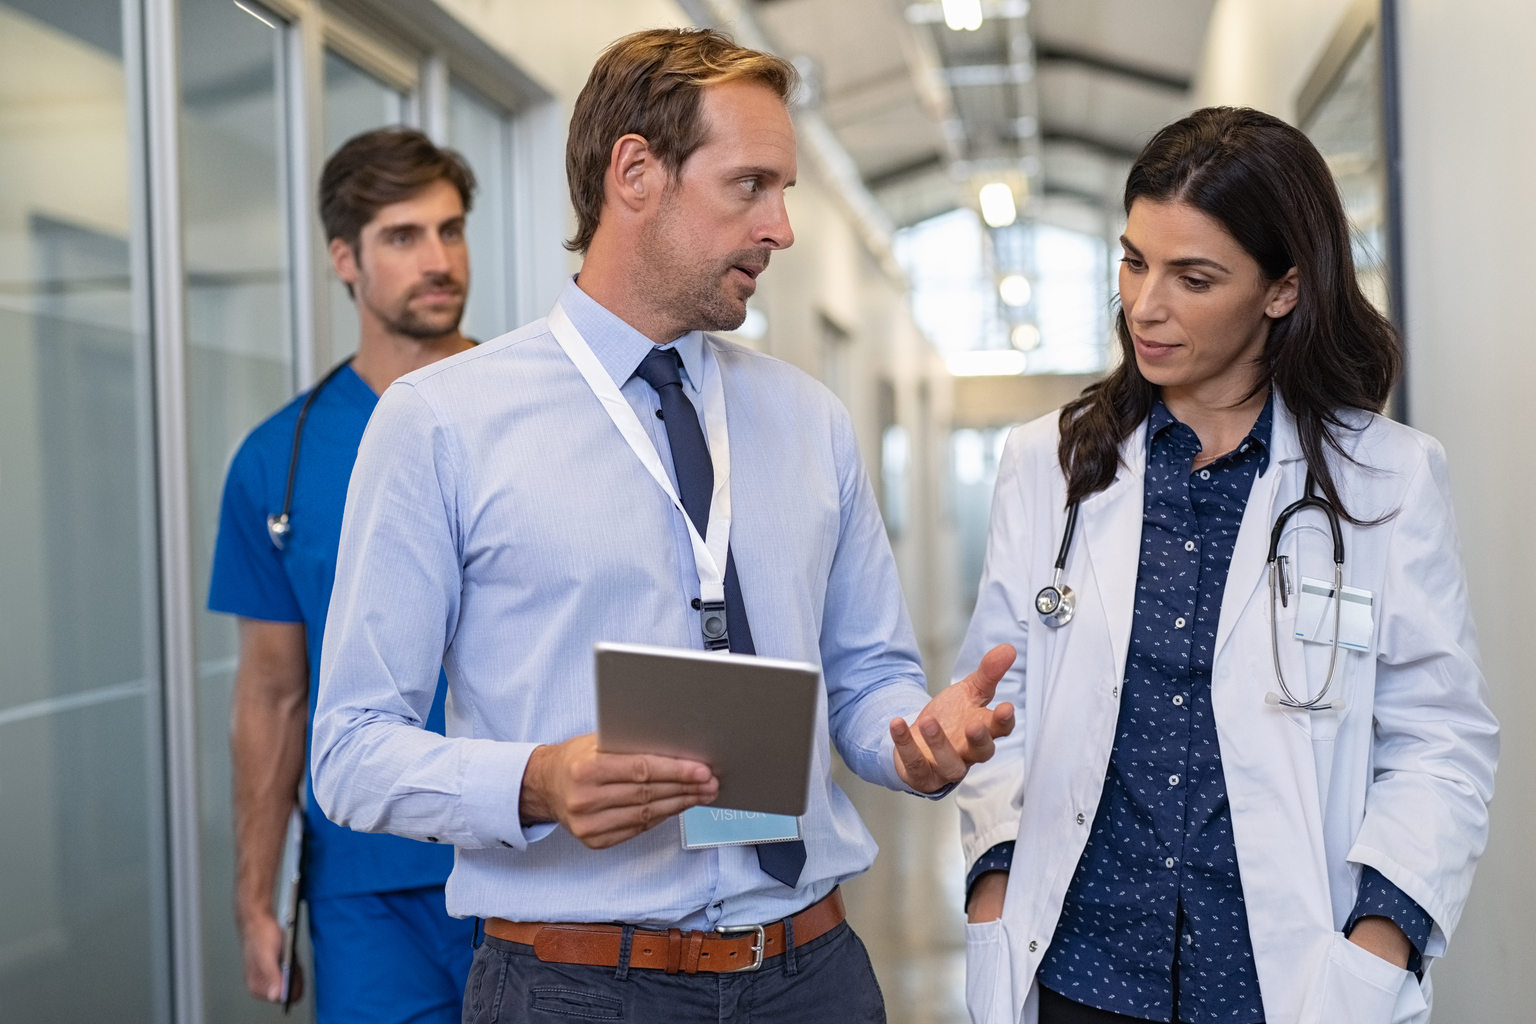 White male and female  doctor discussing in hospital hallway while holding digital tablet. 